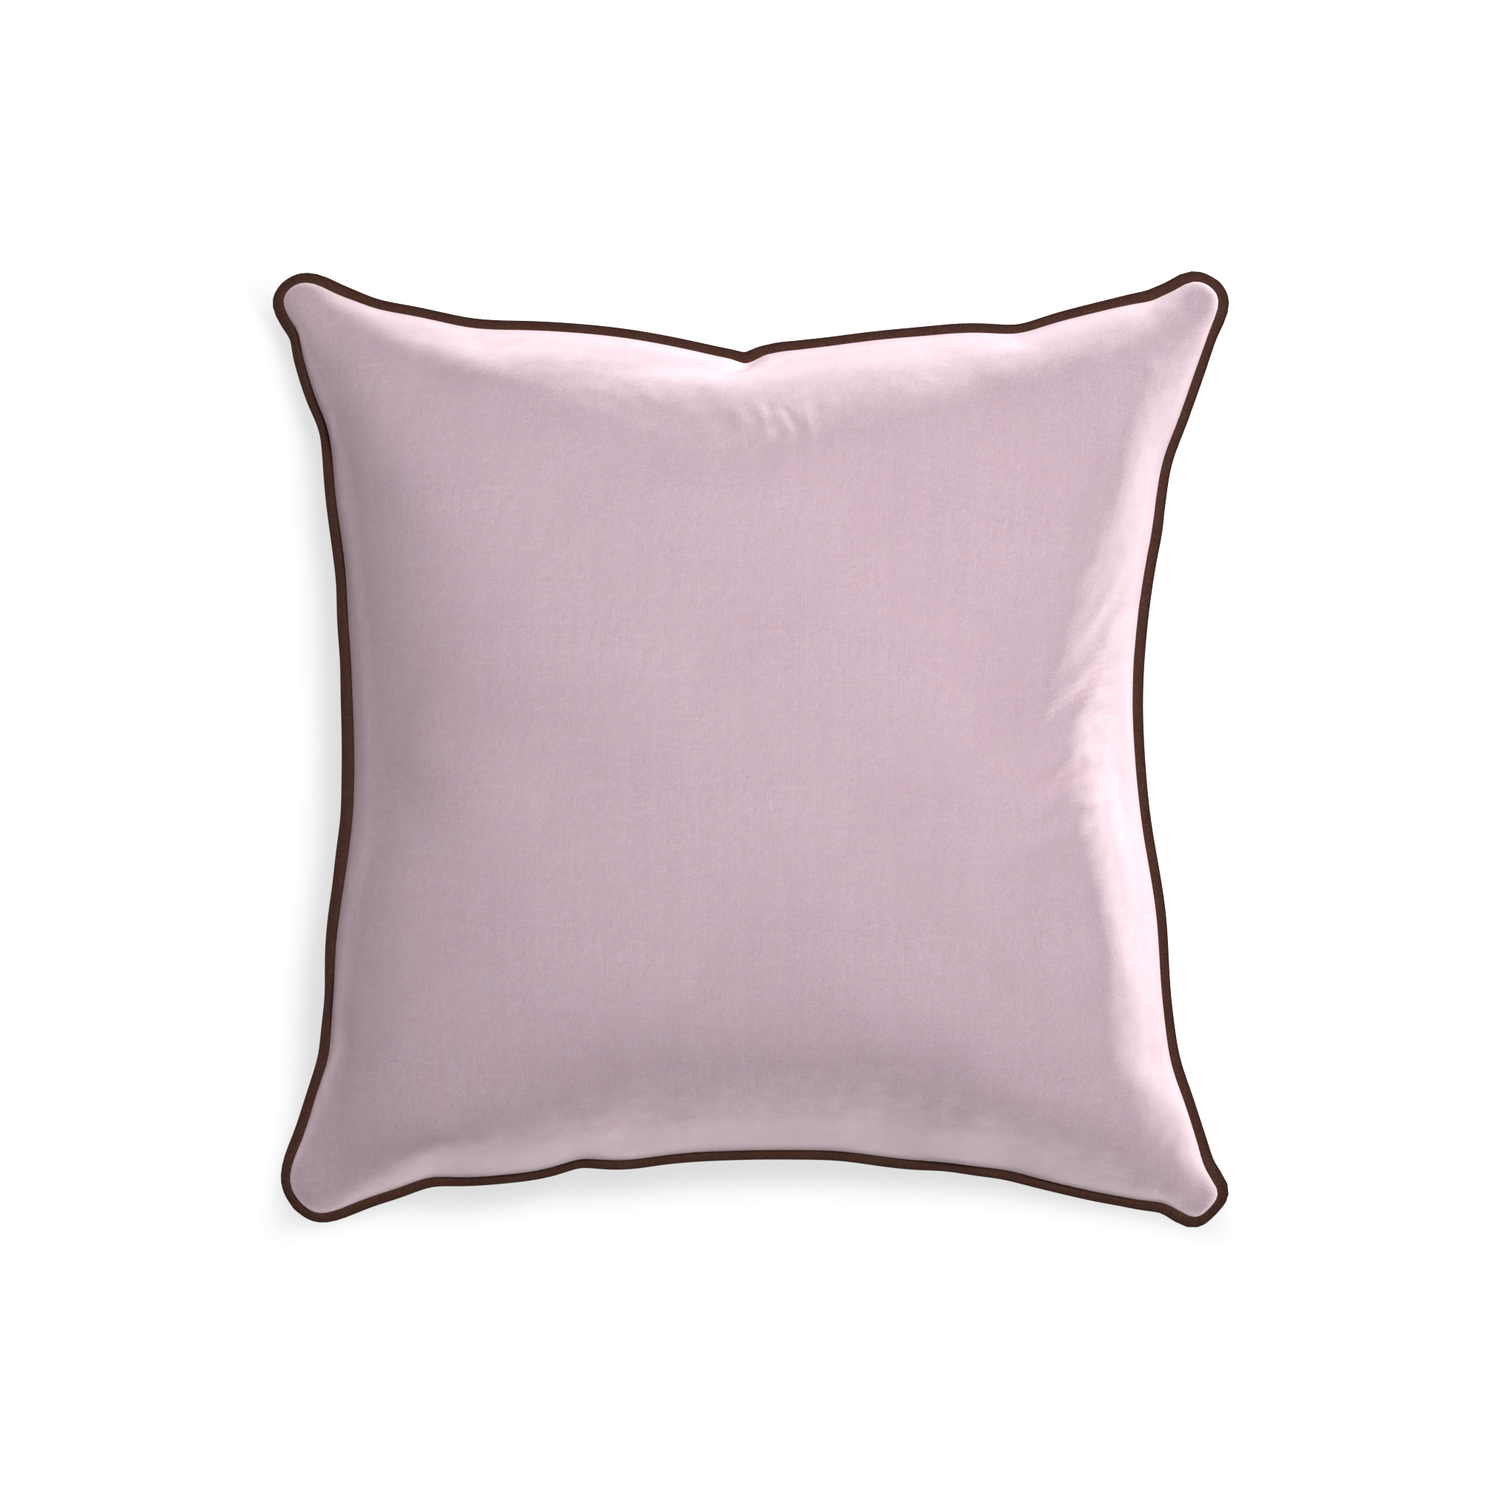 20-square lilac velvet custom lilacpillow with w piping on white background